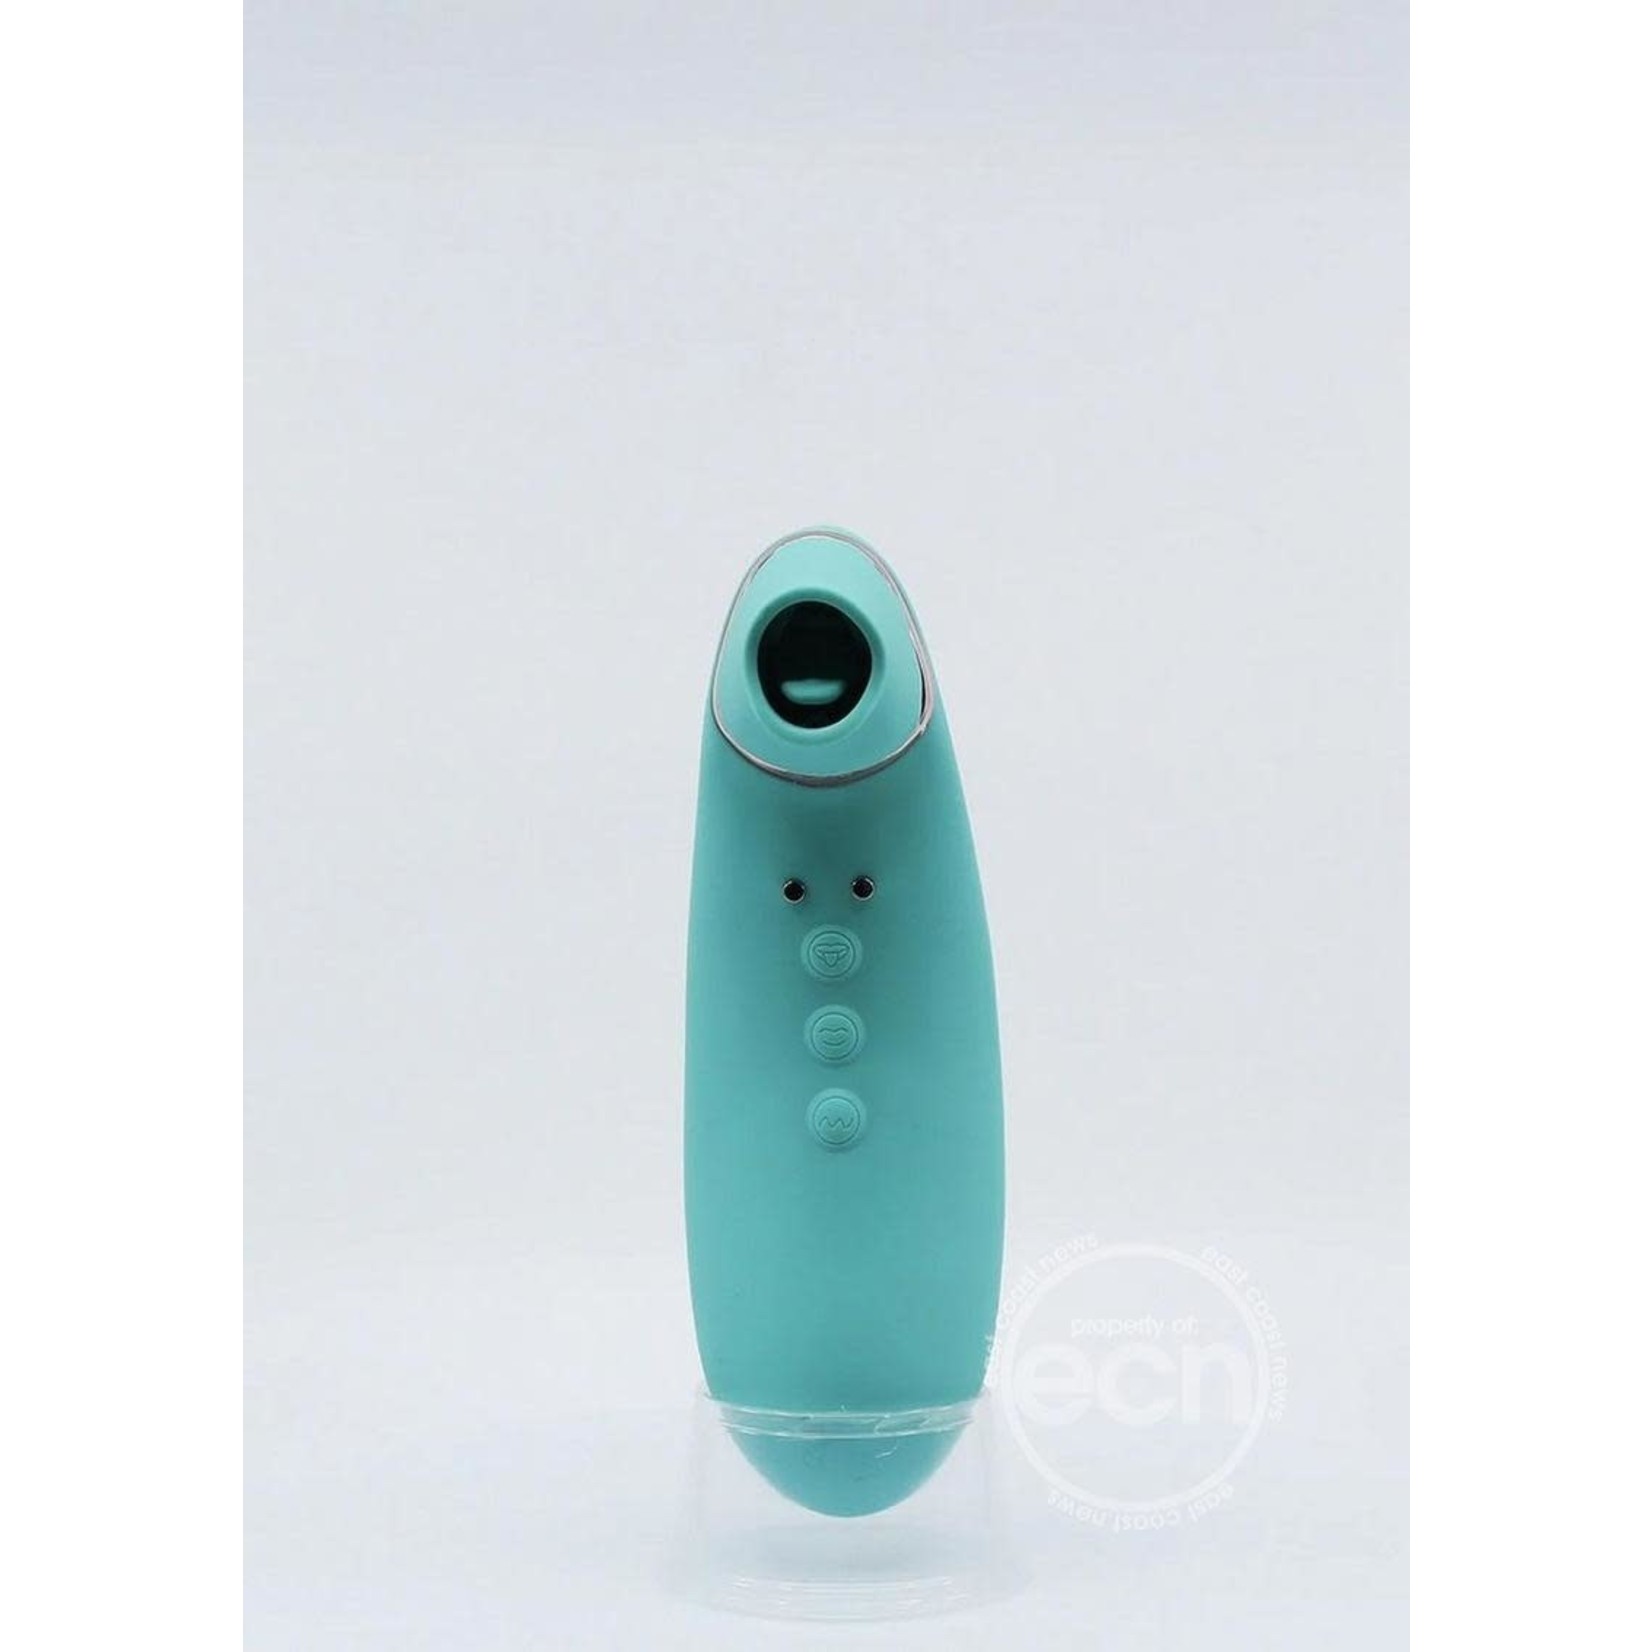 Sensuelle Trinitii 3-in-1 Suction Tongue-Electric Blue